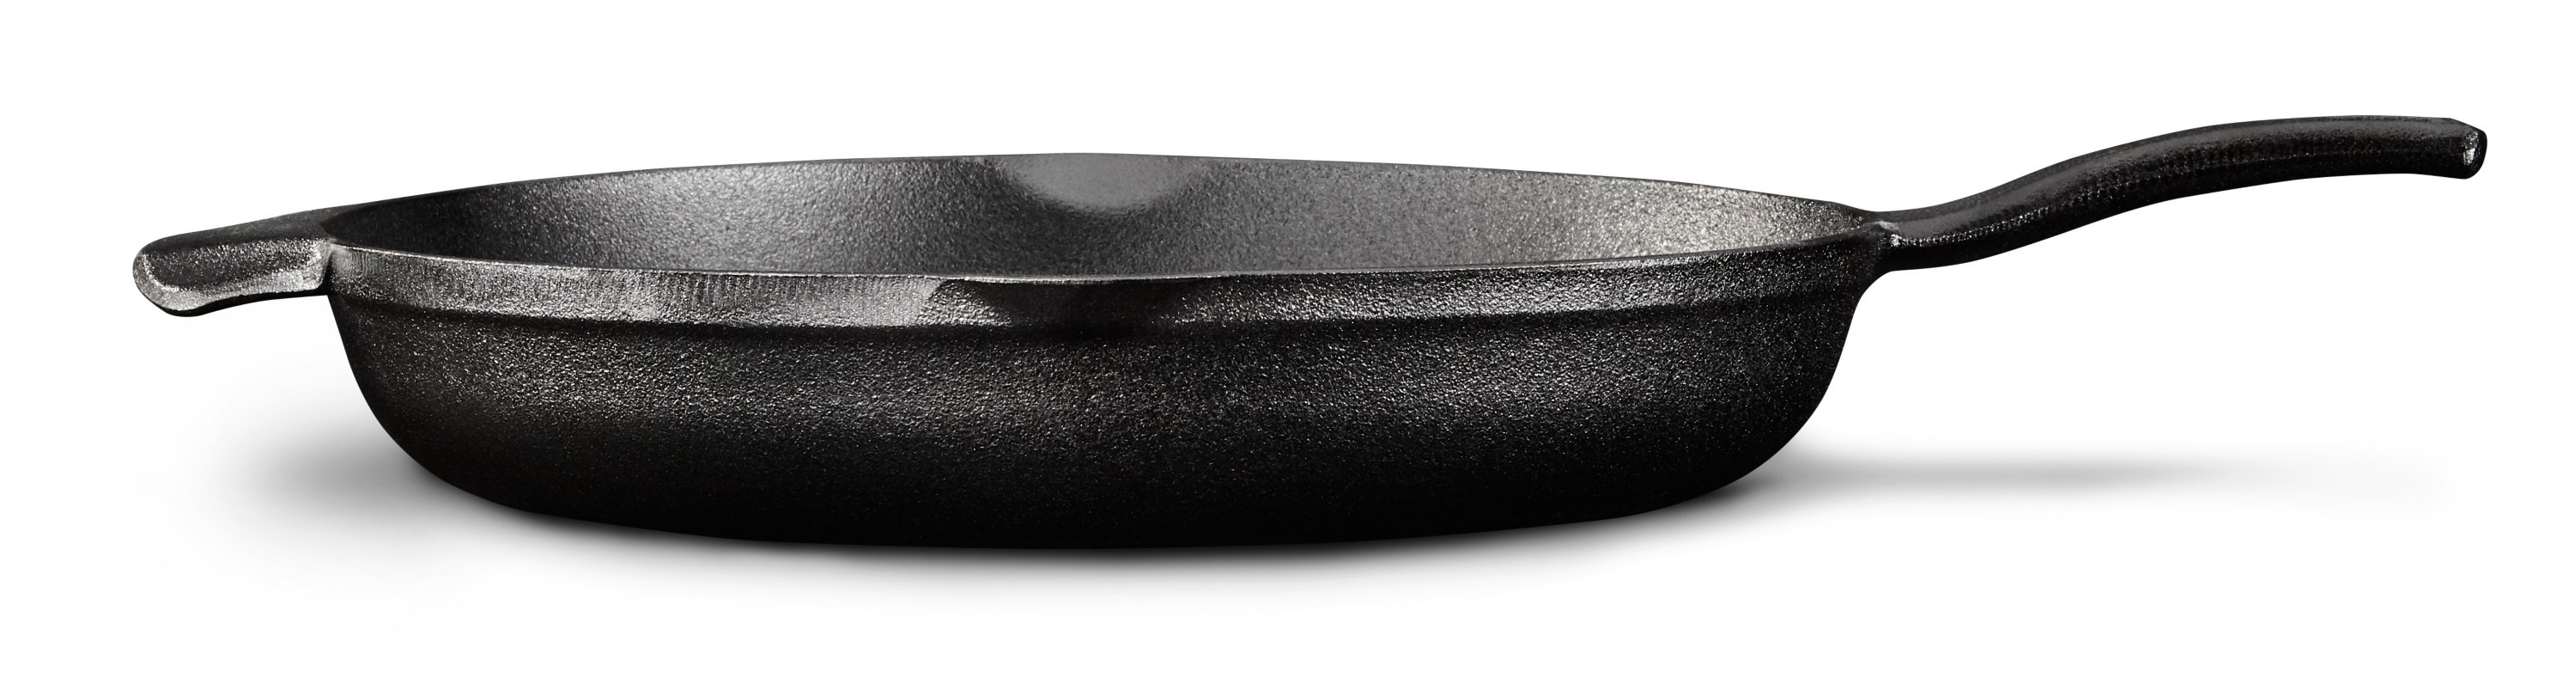 Pre-Seasoned Cast Iron Skillet (12-Inch) with Glass Lid and Handle